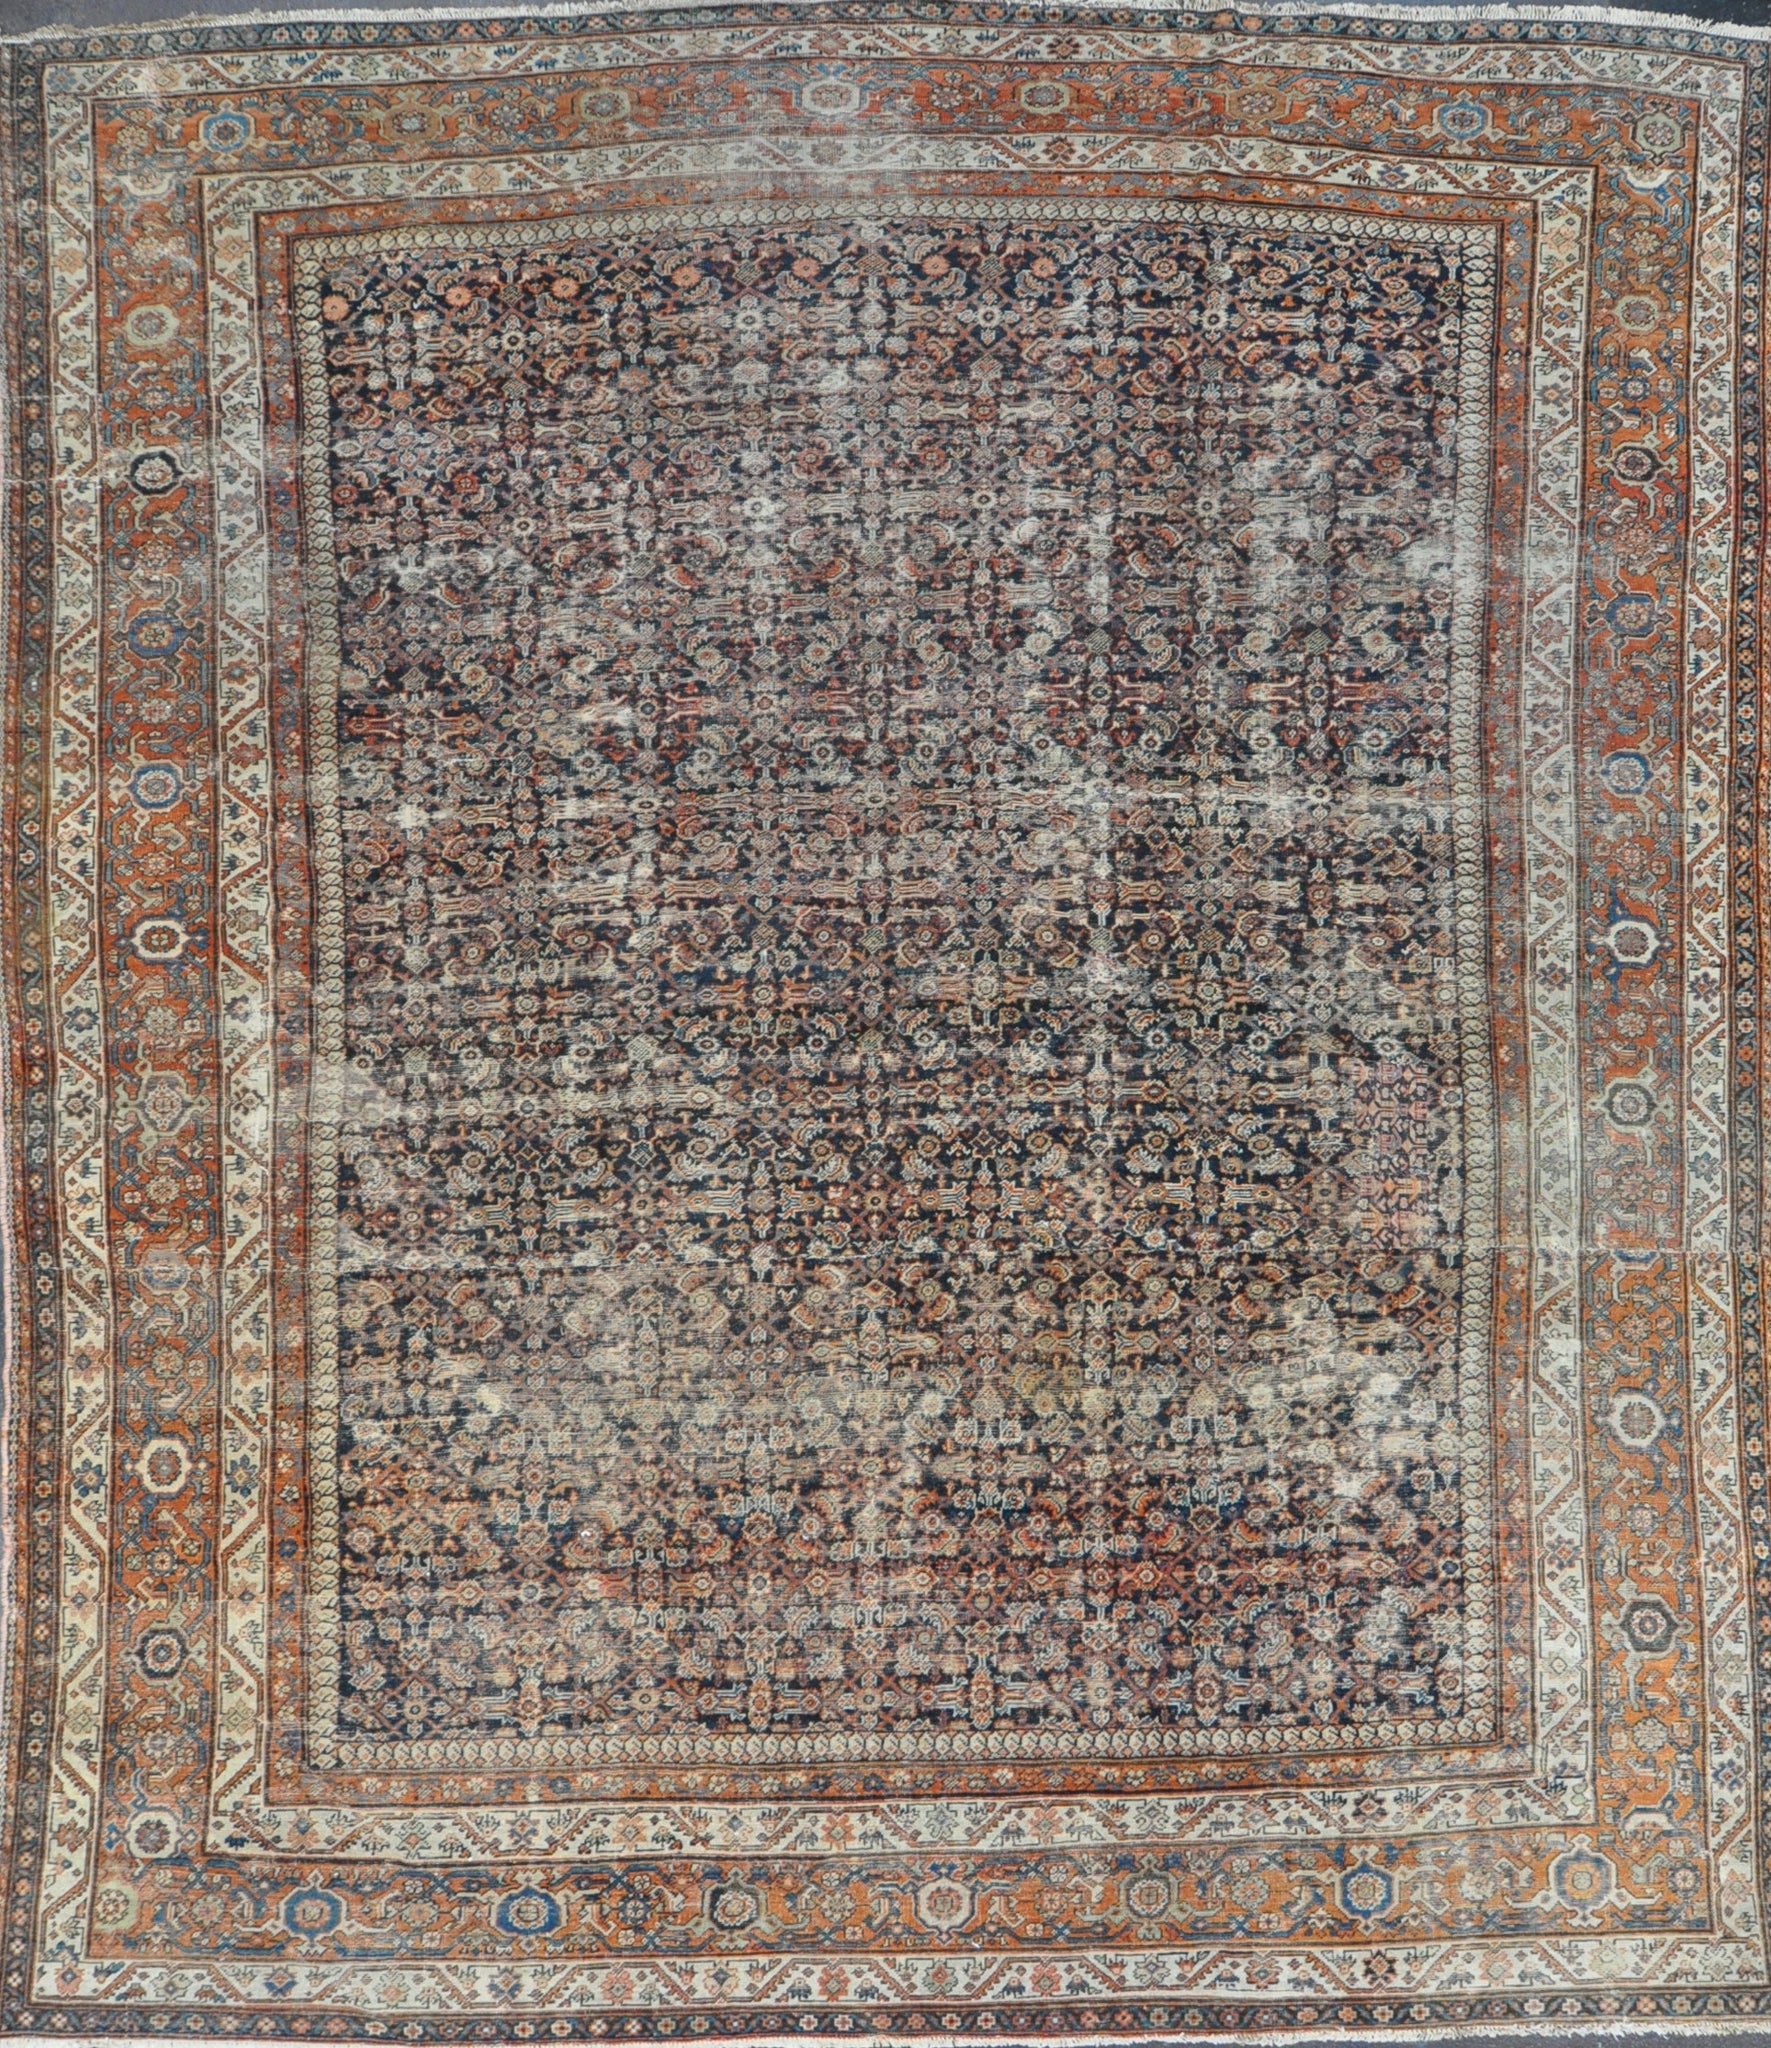 11.3x14 Persian antique sultanabad Circa 1870's #44844 Sold